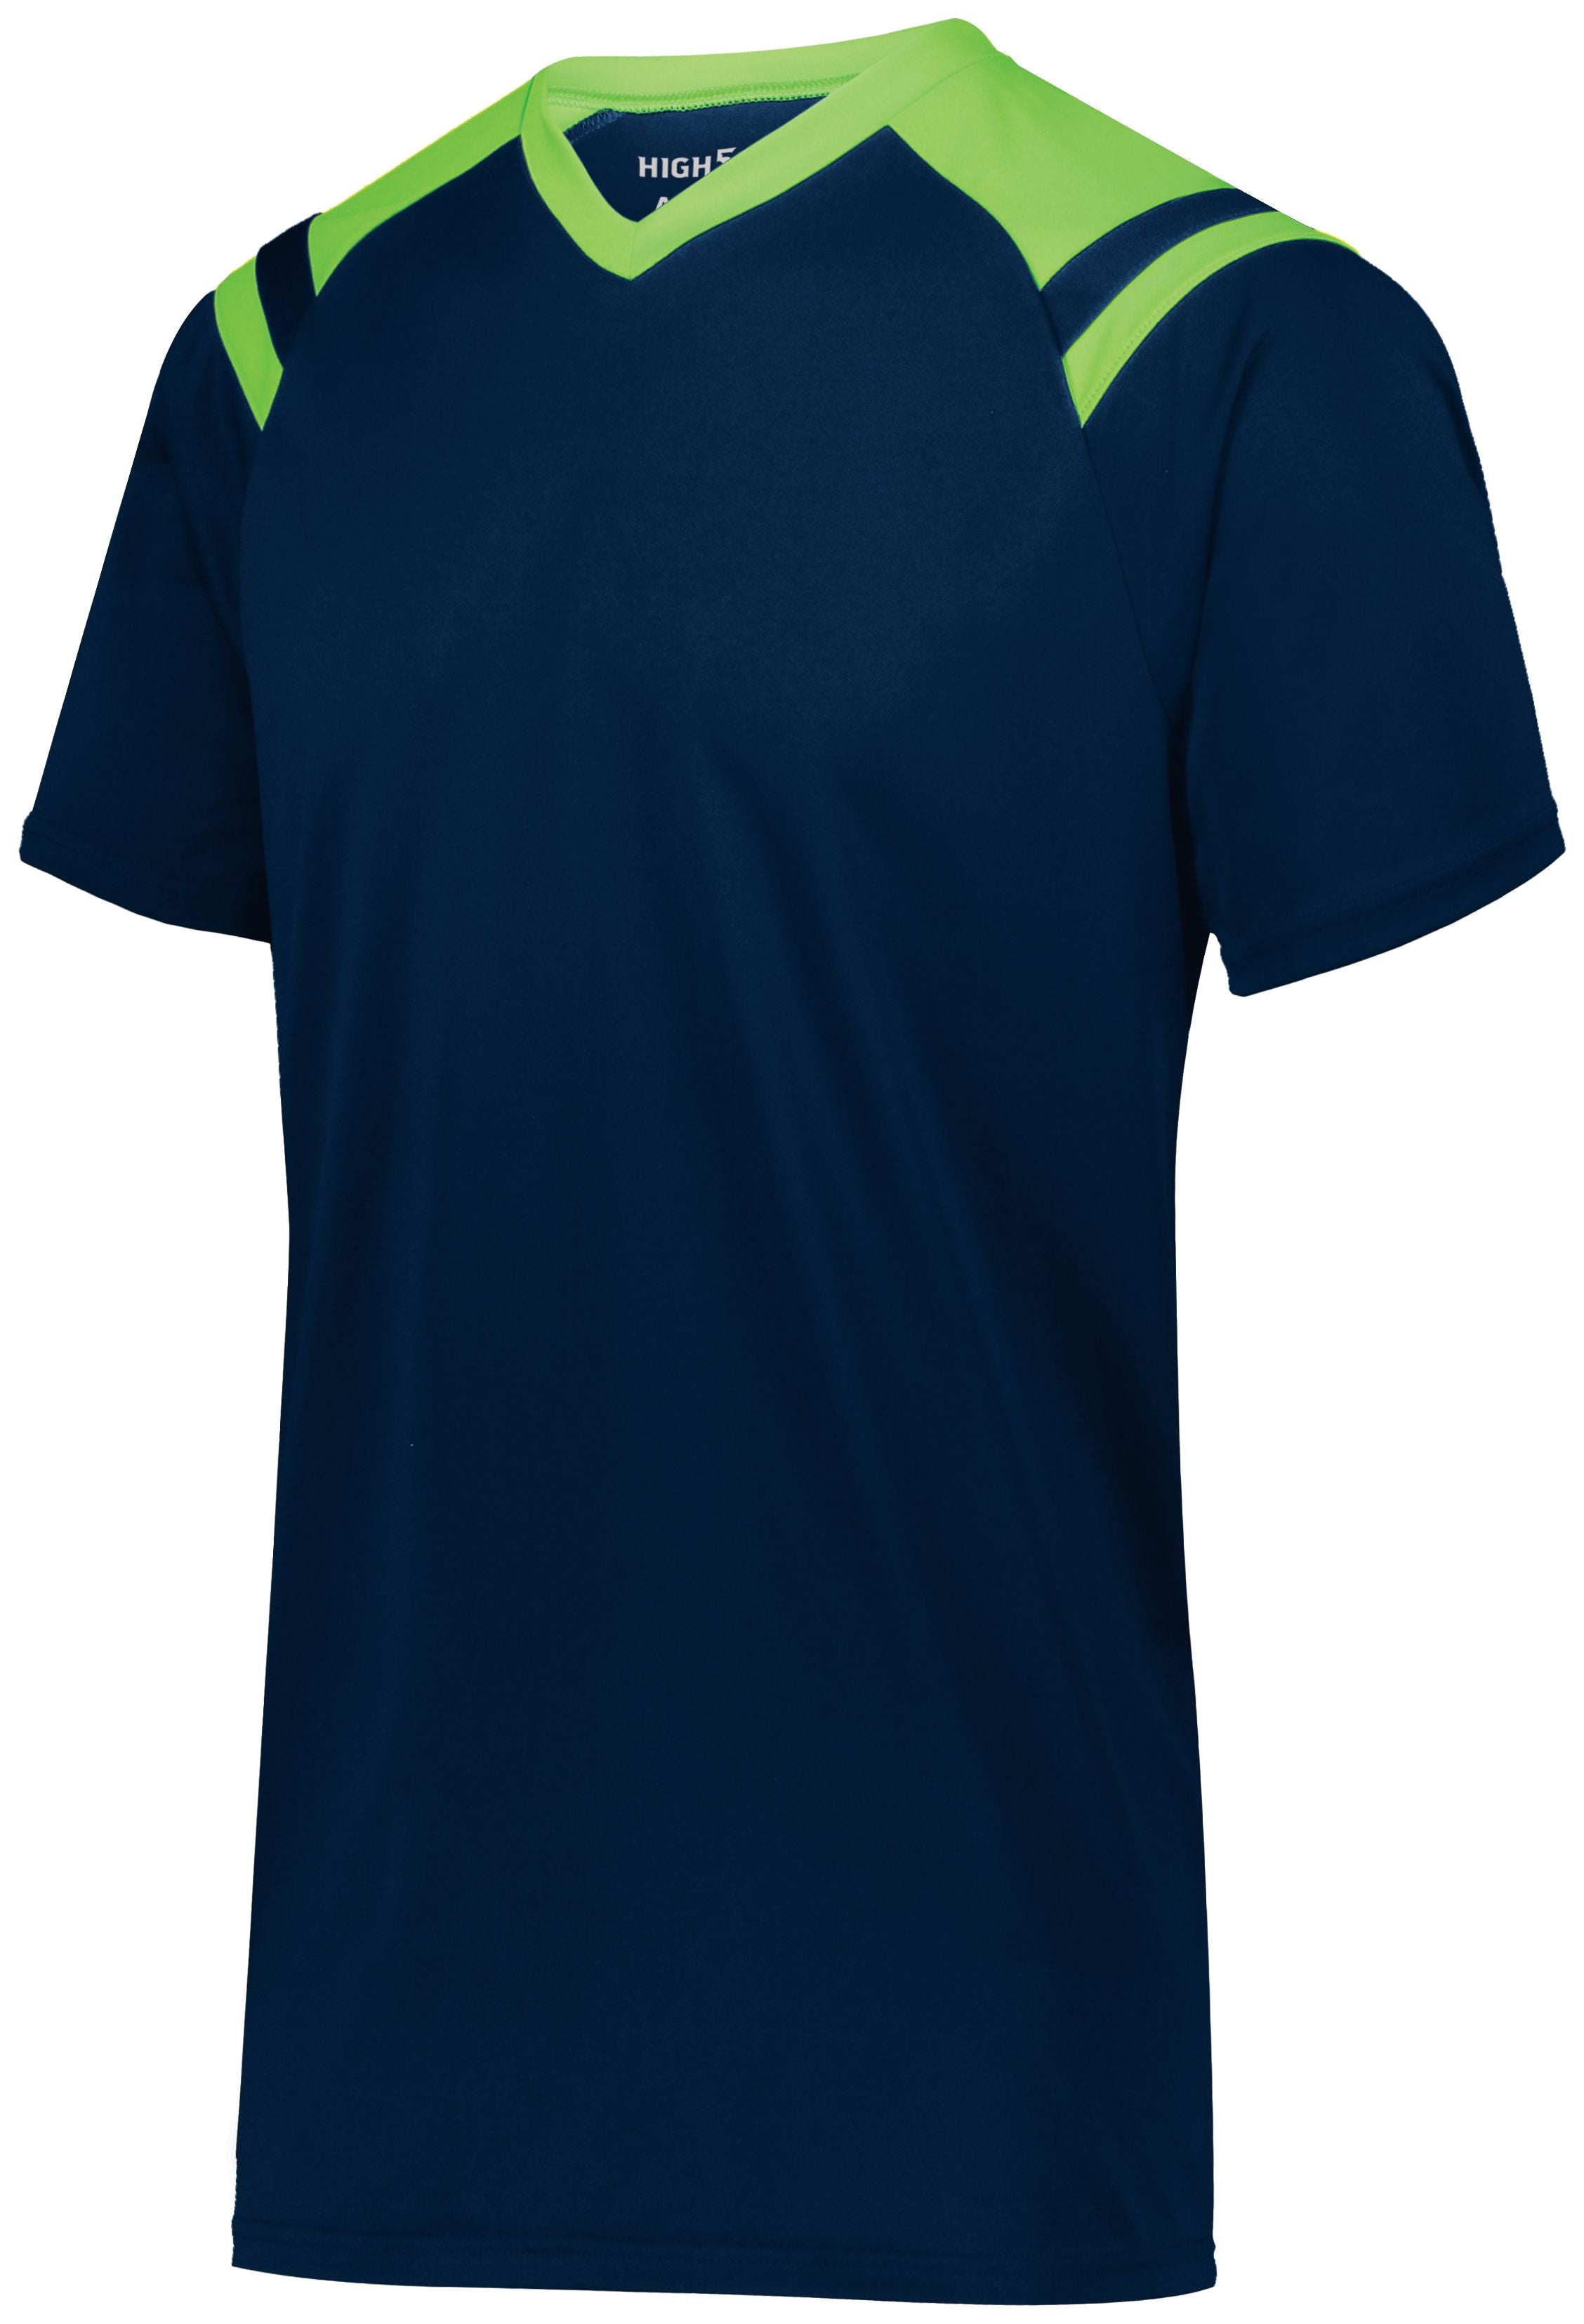 High 5 Youth Sheffield Jersey in Navy/Lime  -Part of the Youth, Youth-Jersey, High5-Products, Soccer, Shirts, All-Sports-1, Sheffield-Soccer-Jerseys product lines at KanaleyCreations.com